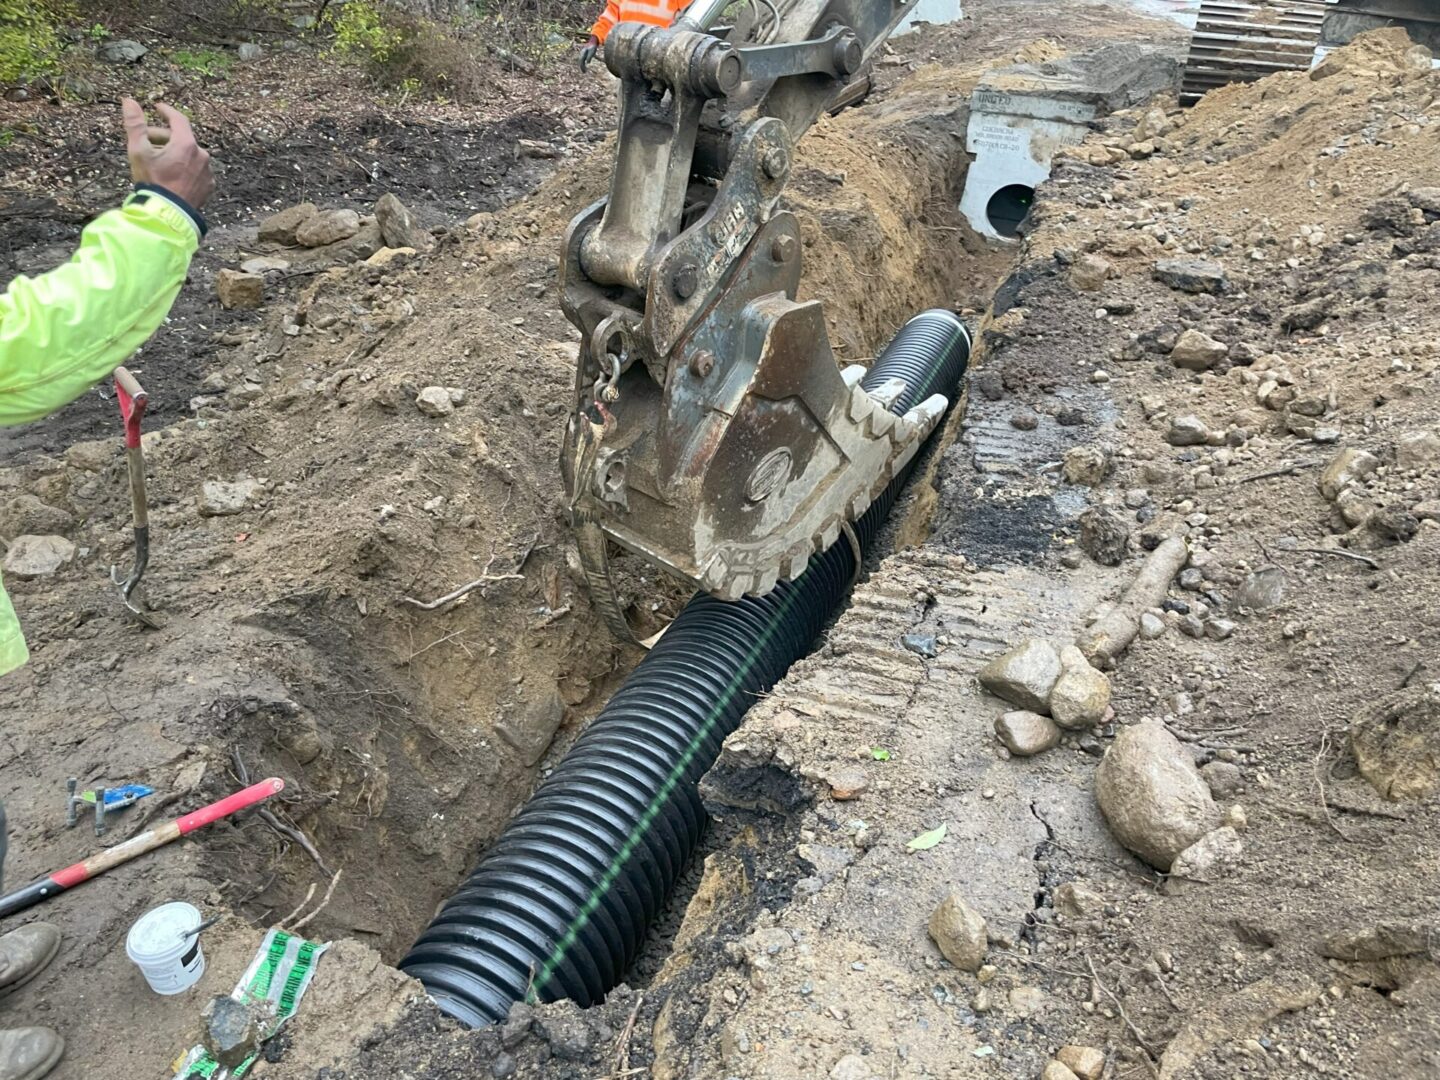 A pipe laying in the ground next to a pile of dirt.